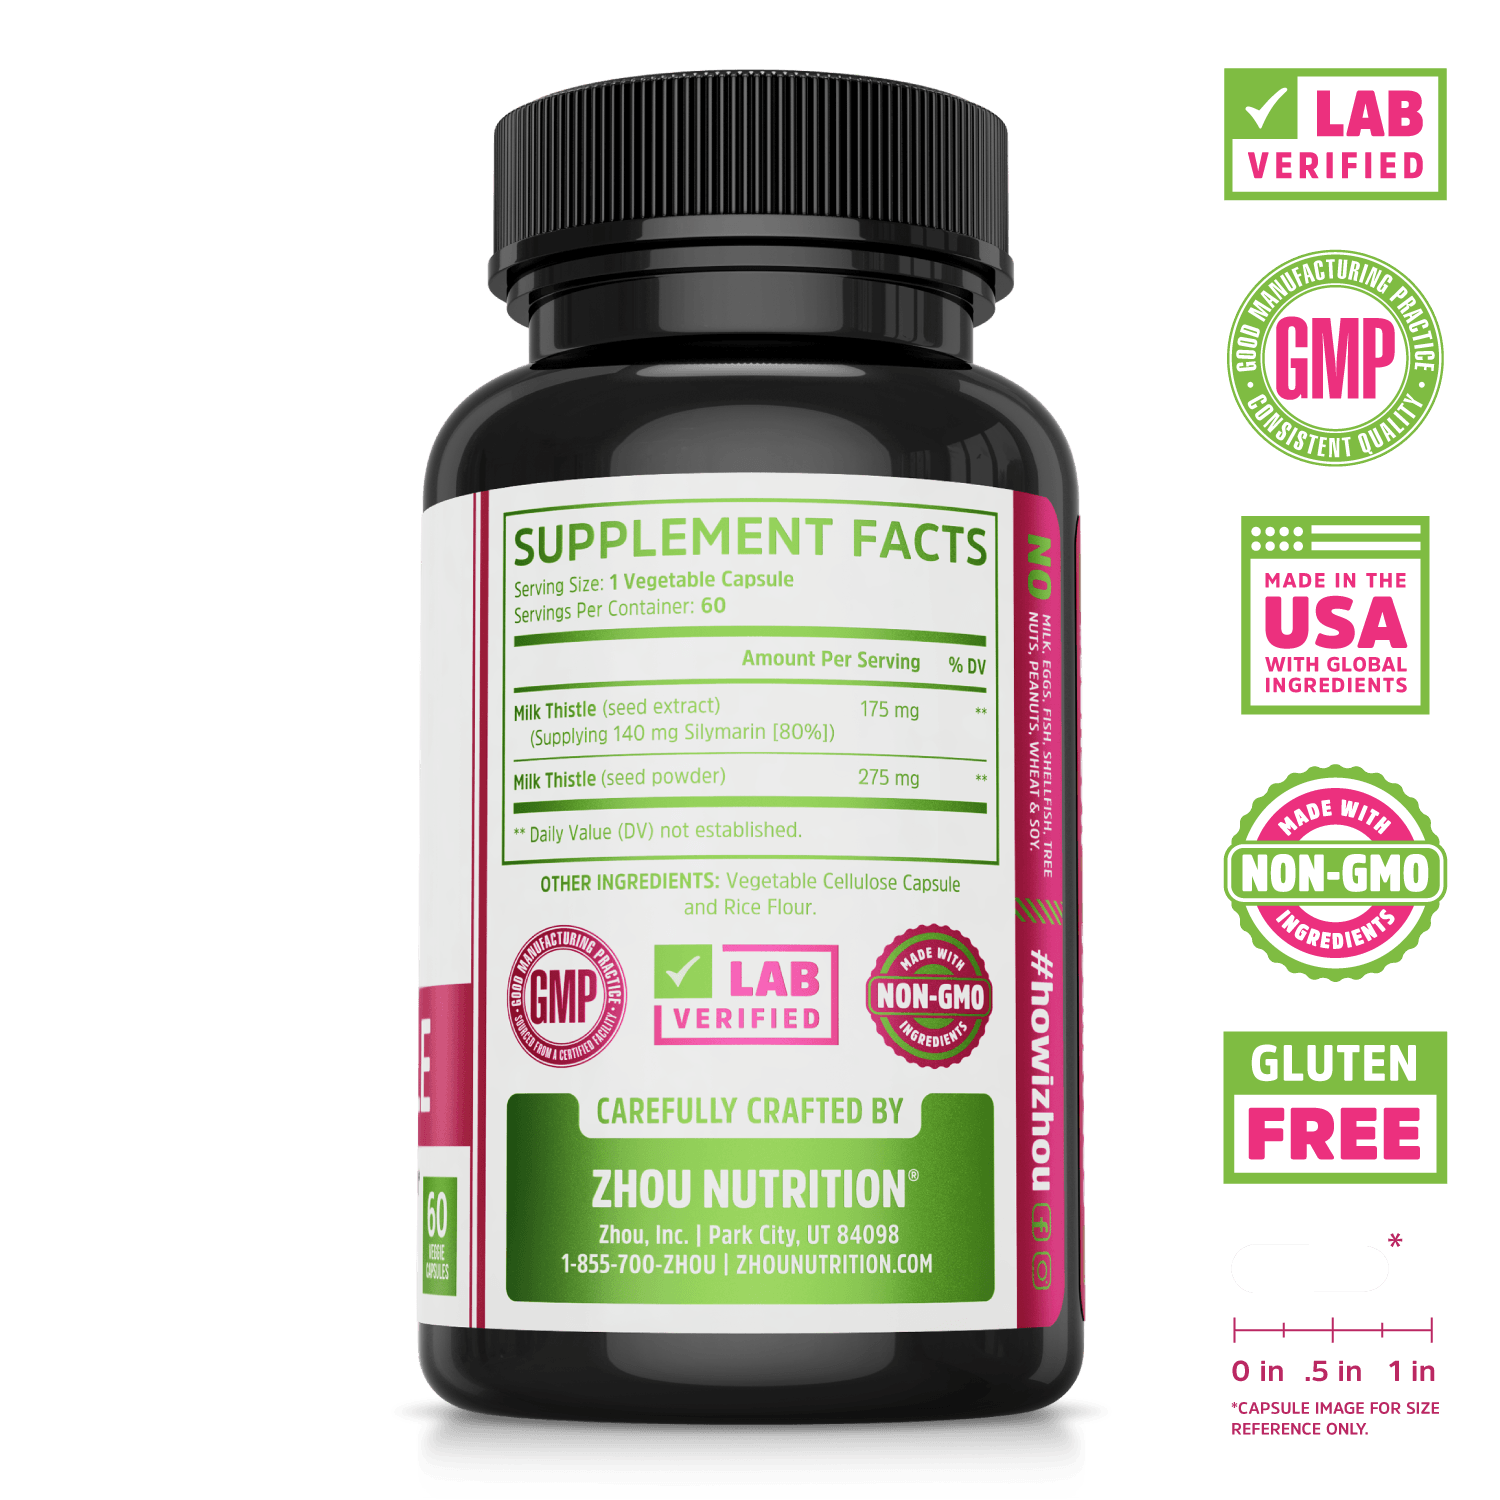 Zhou Nutrition Milk Thistle supplement for liver health. Lab verified, good manufacturing practices, made in the USA with global ingredients, made with non-GMO ingredients, gluten free